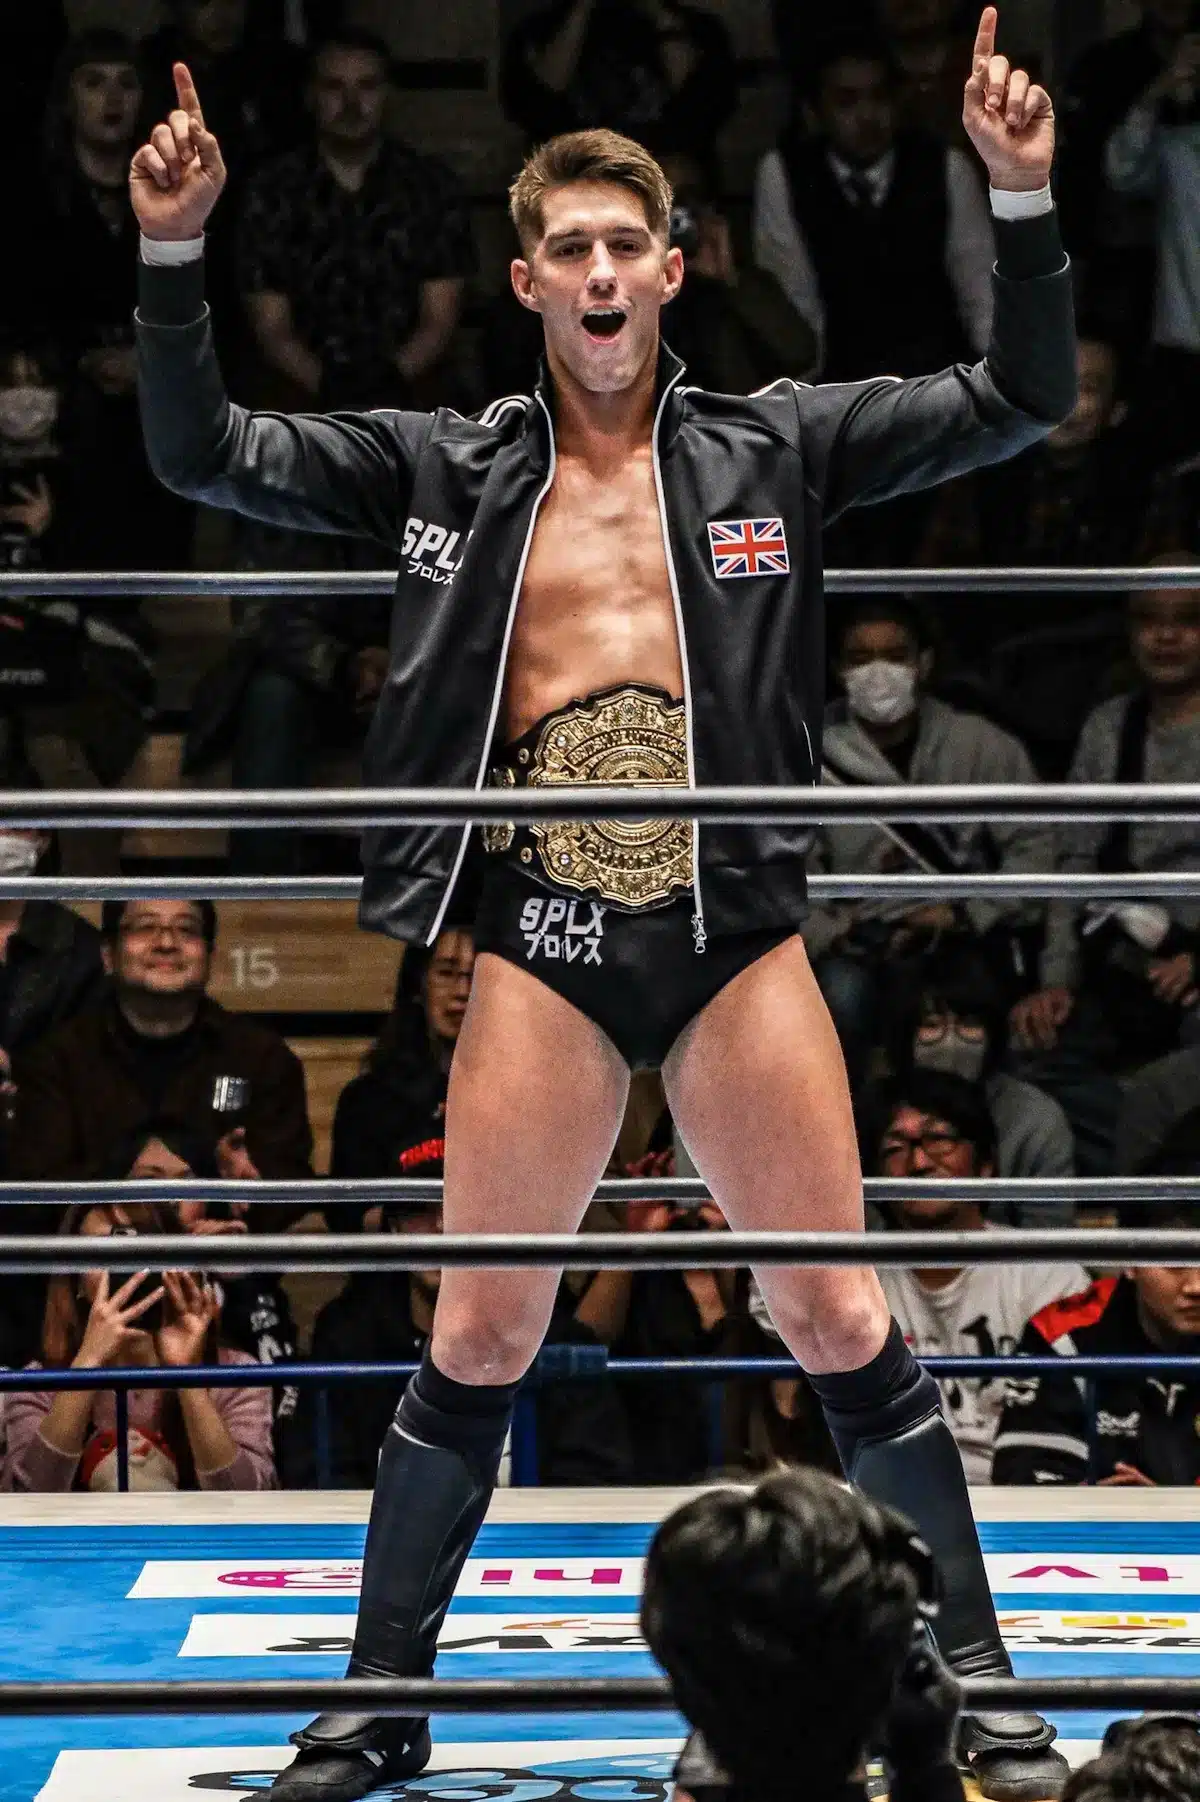 Photo Of Zack Sabre Jr. In The Centre Of A Wrestling Ring Indicating With His Fingers That He'S Number 1